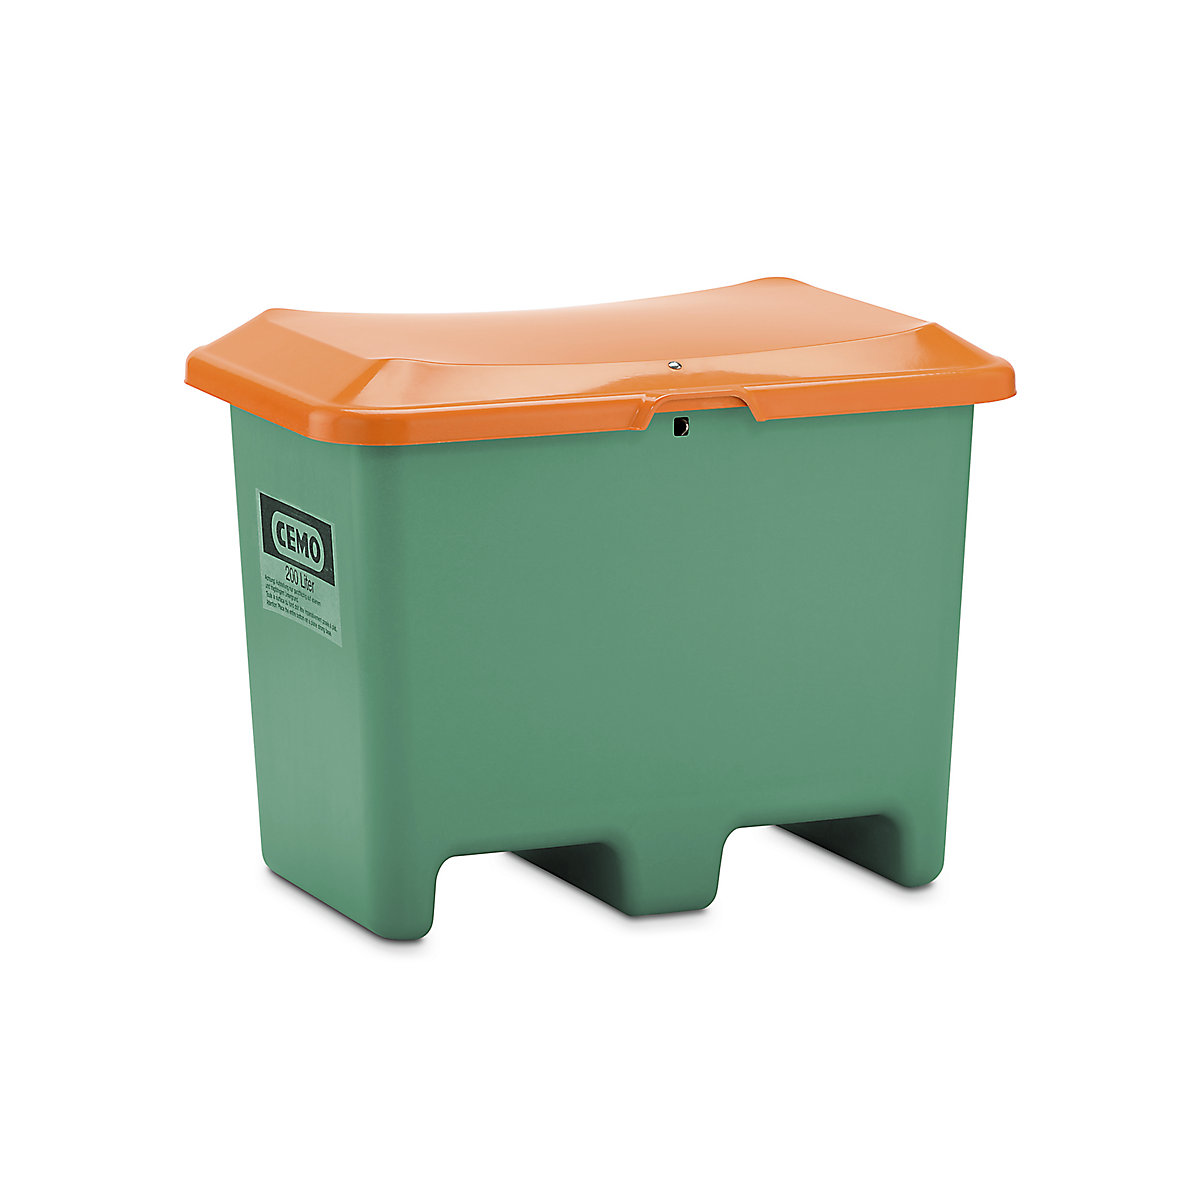 Grit container made of GRP – CEMO, capacity 200 l, without dispenser opening, clearance for forklift, green container-4